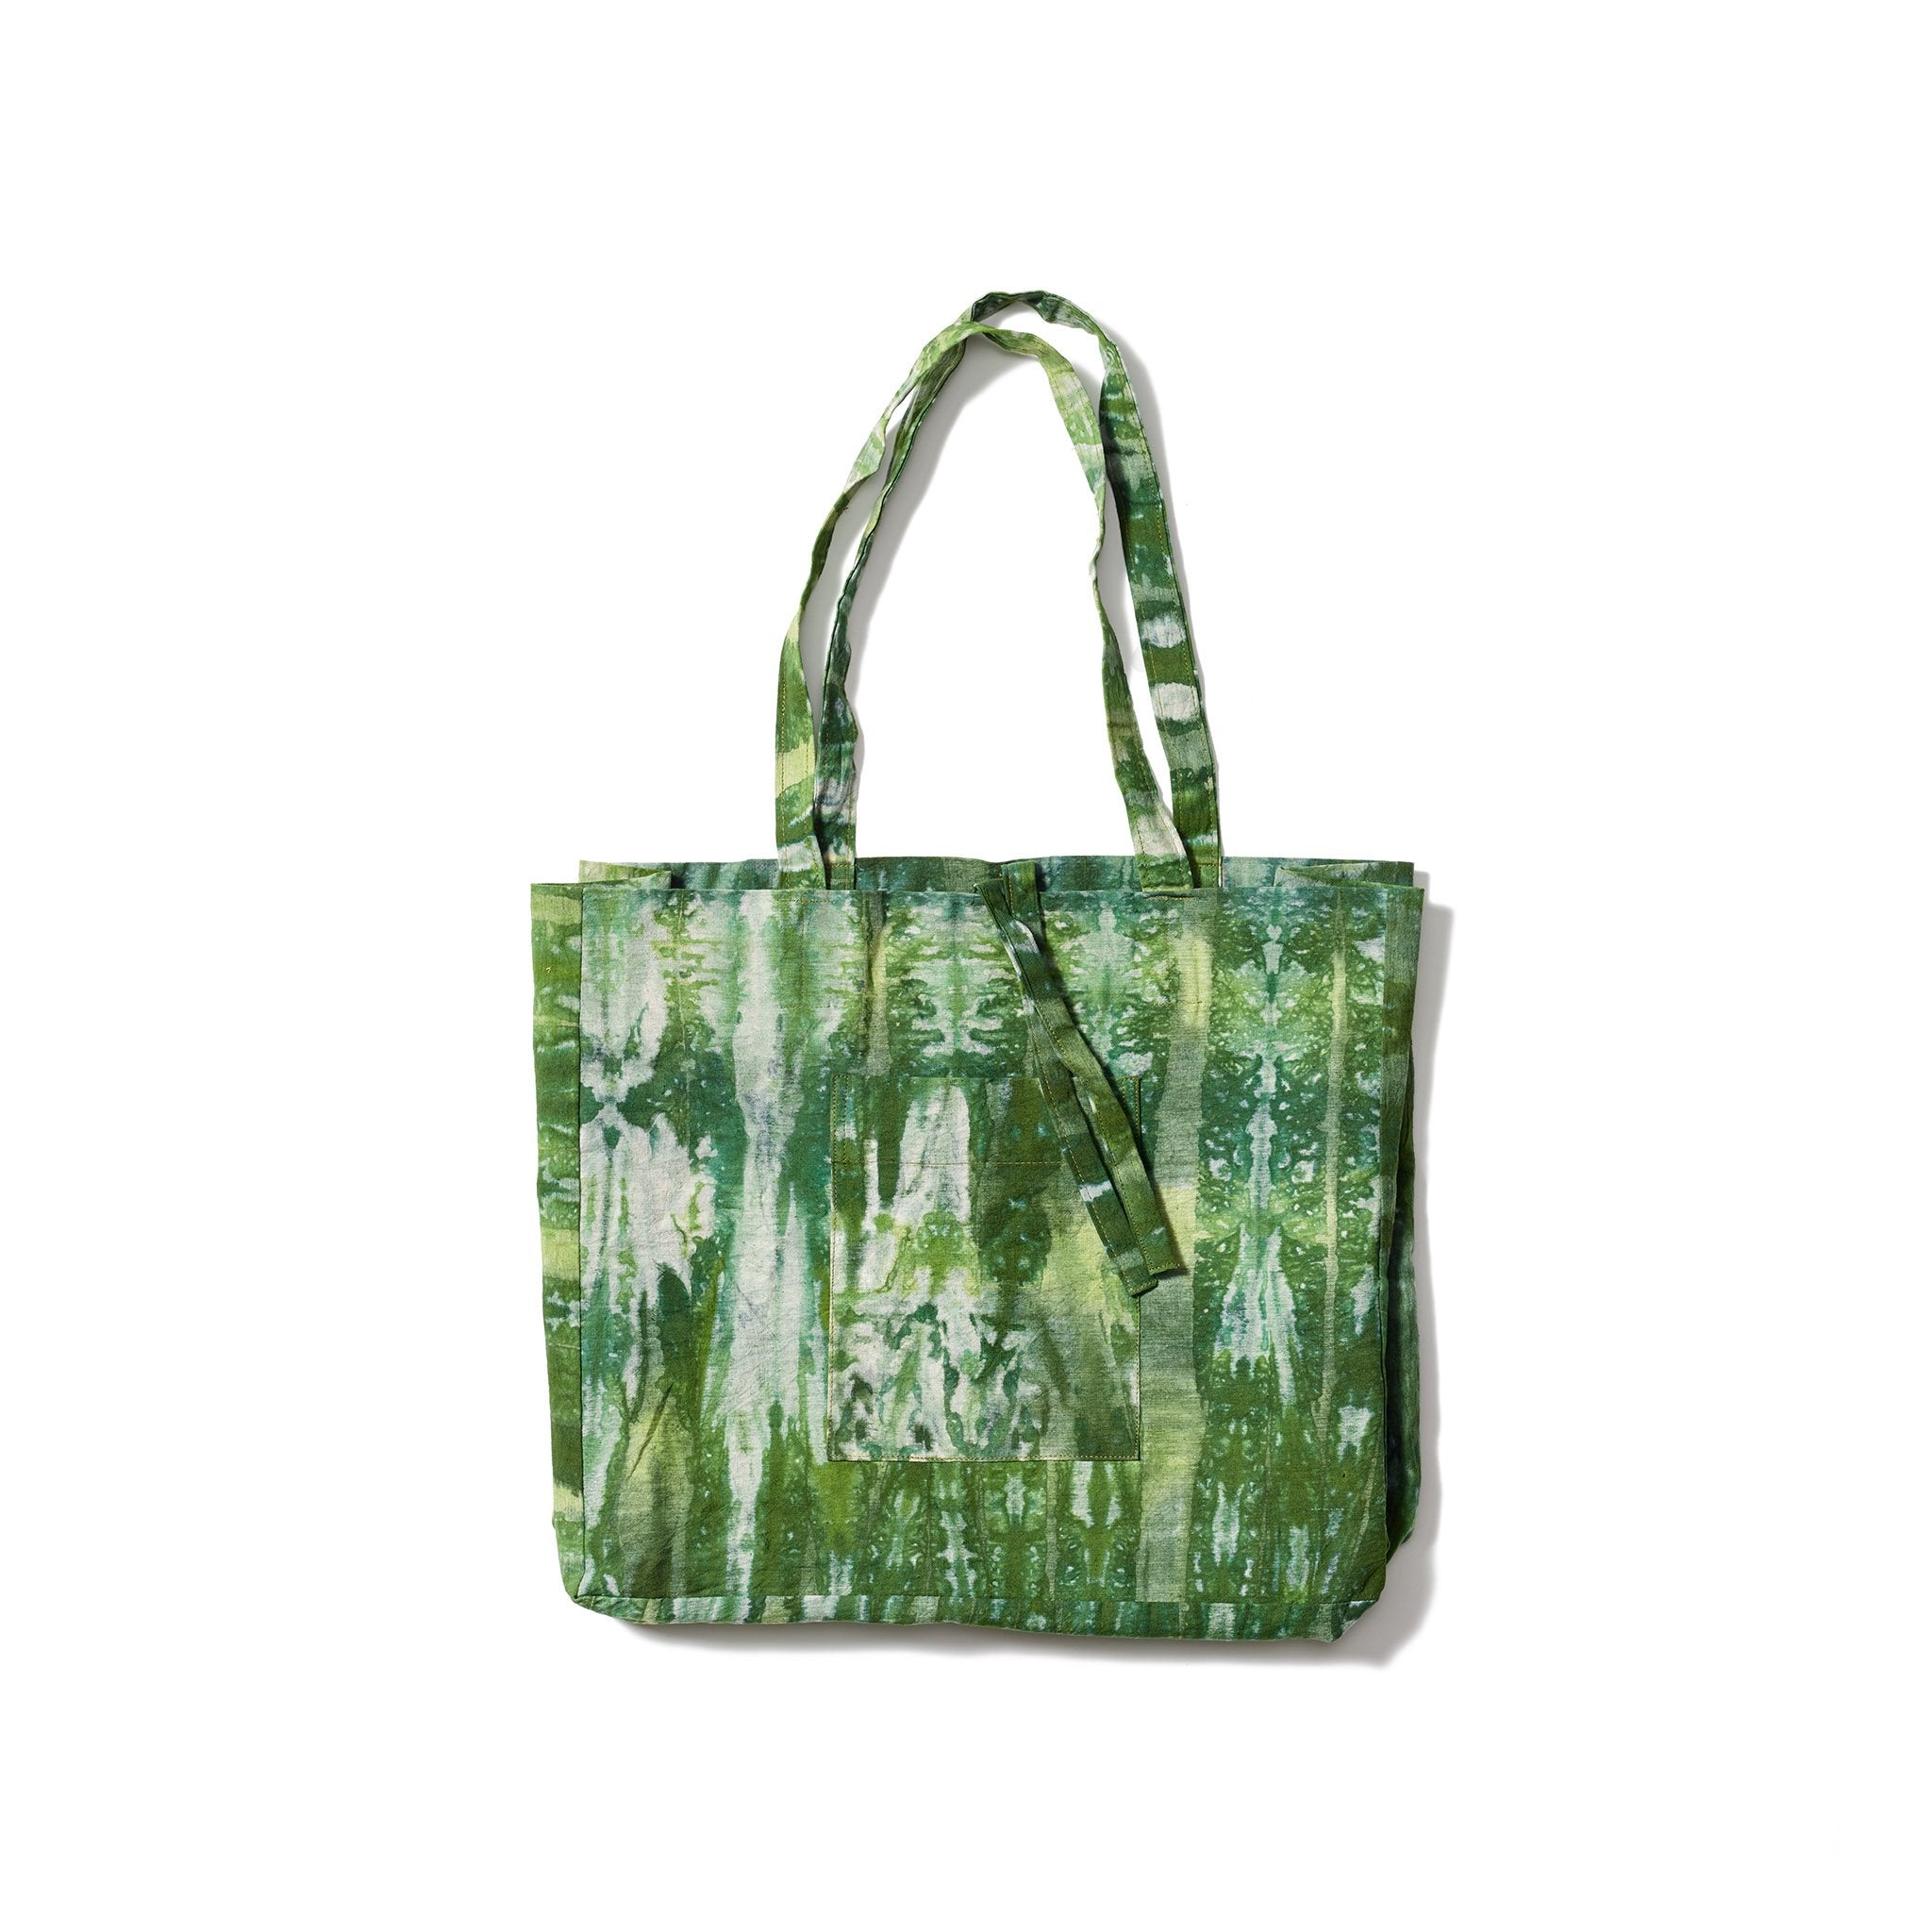 A carefree and charming green tie-dye tote bag made from hand-spun 100% organic cotton and all natural dye.